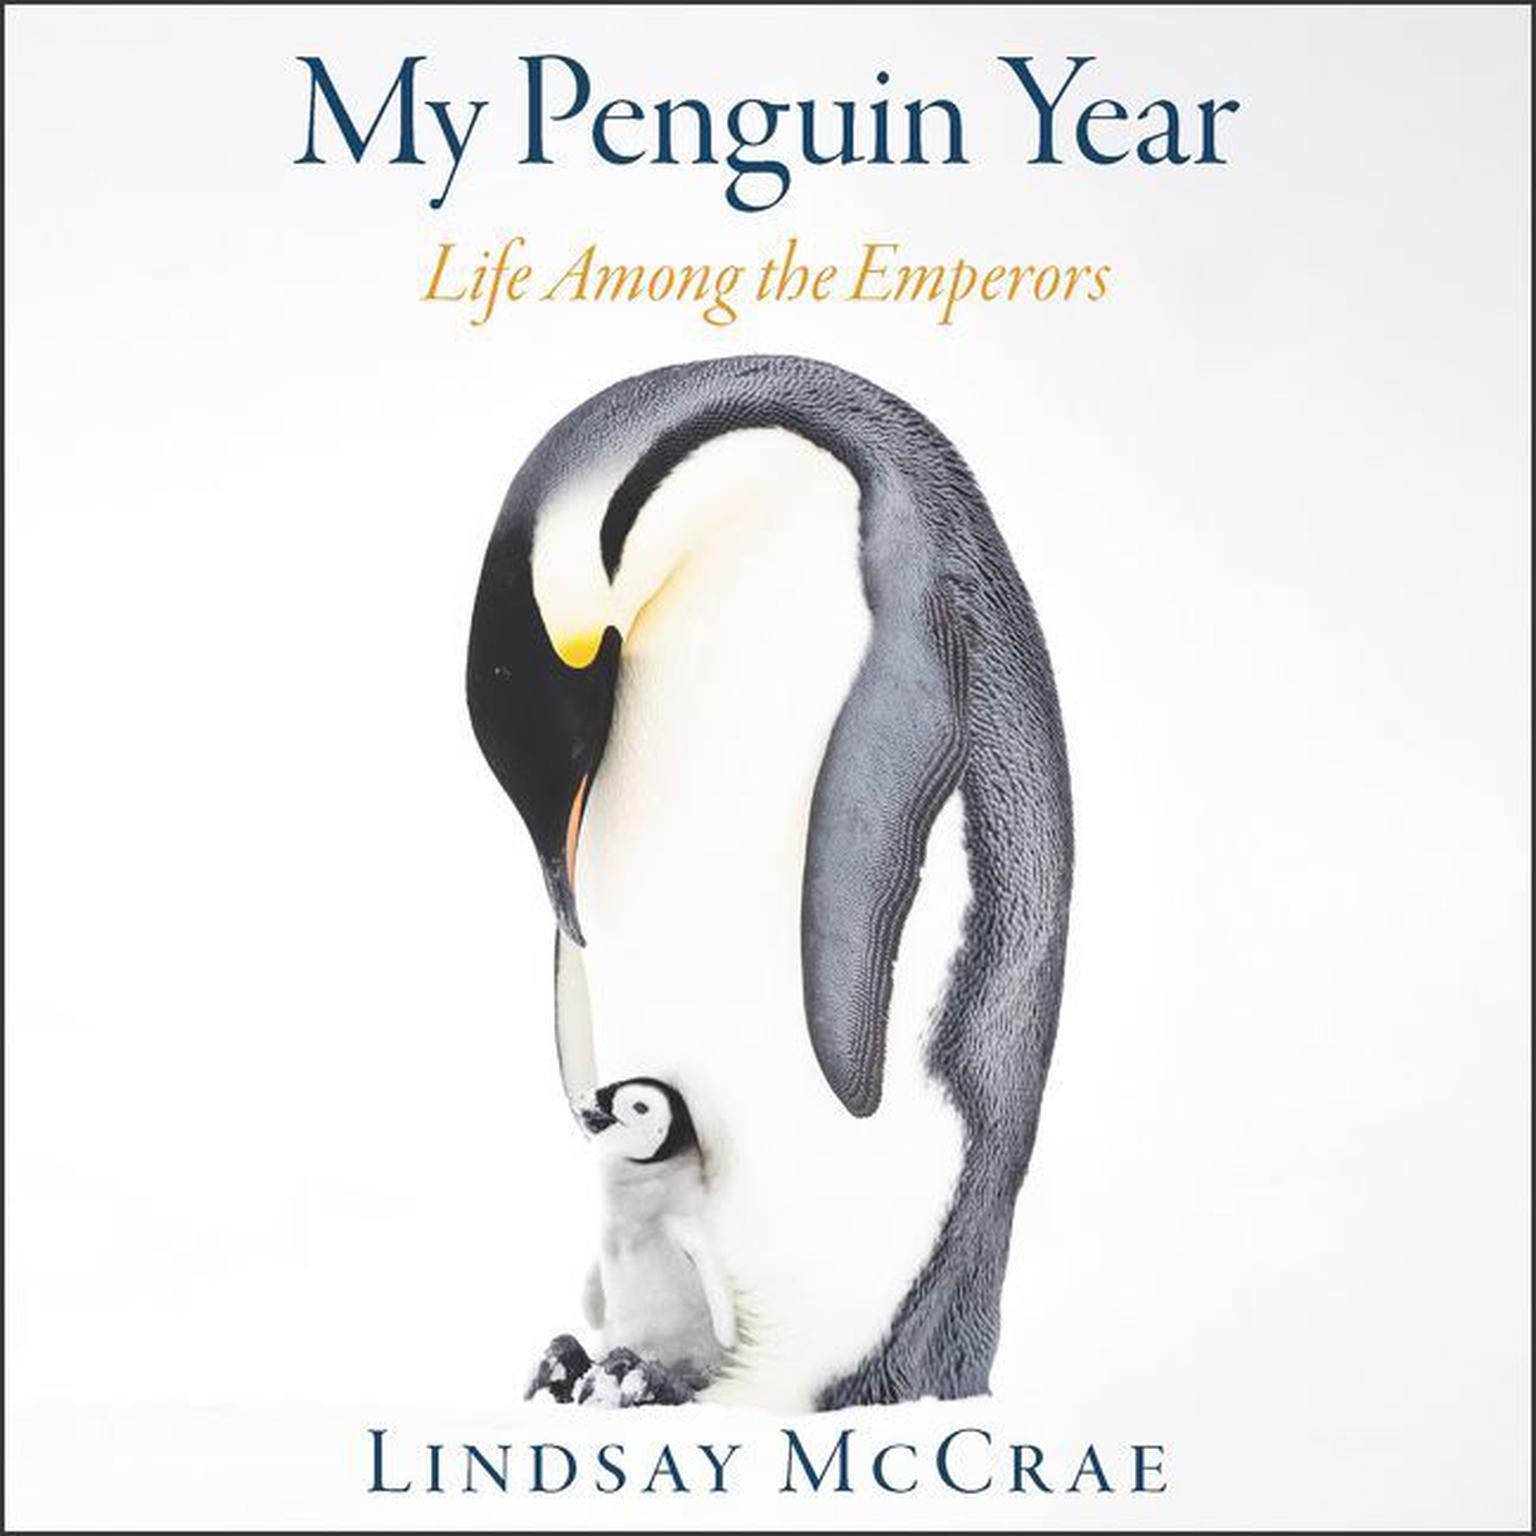 My Penguin Year: Life Among the Emperors Audiobook, by Lindsay McCrae